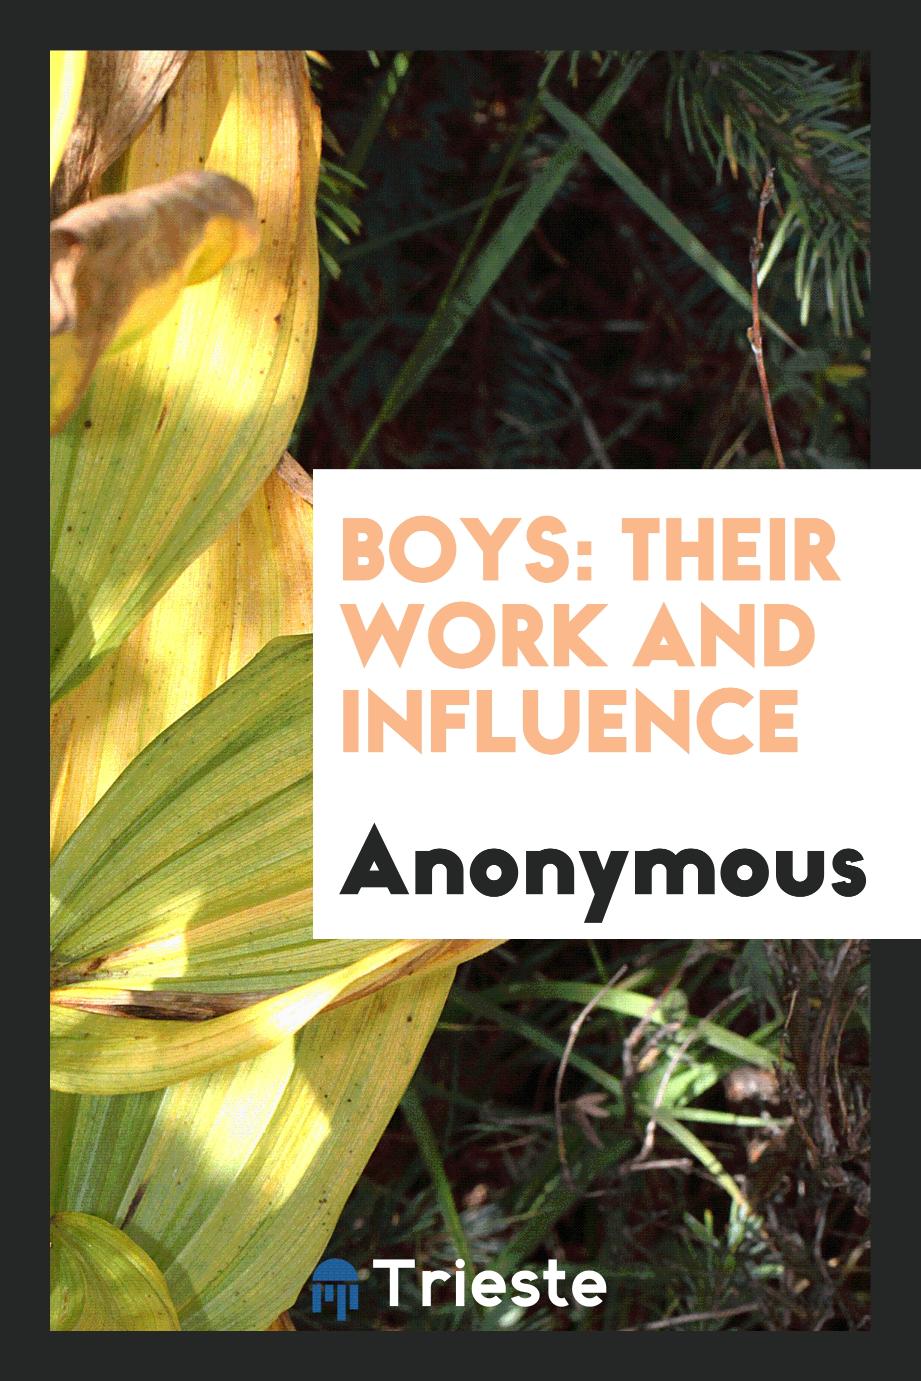 Boys: their work and influence